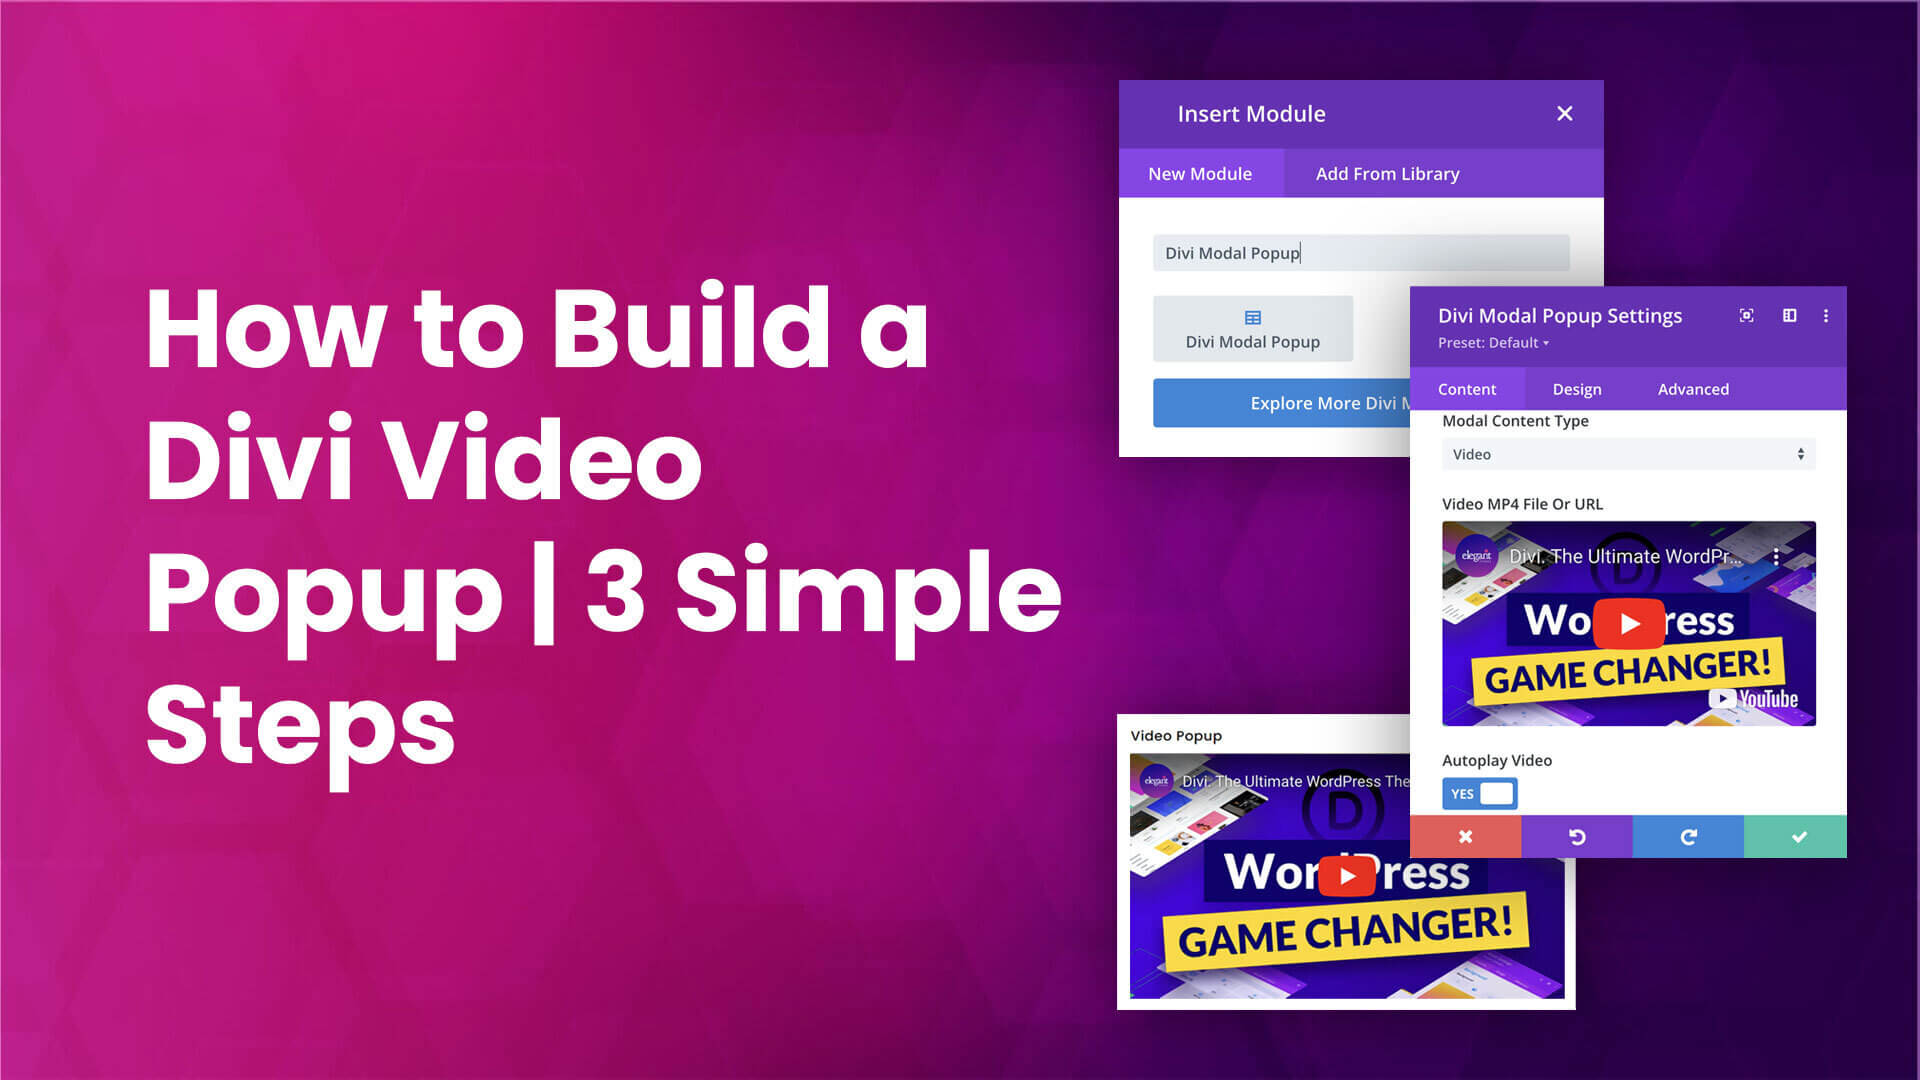 Build a Divi Video Popup in 3 Simple Steps